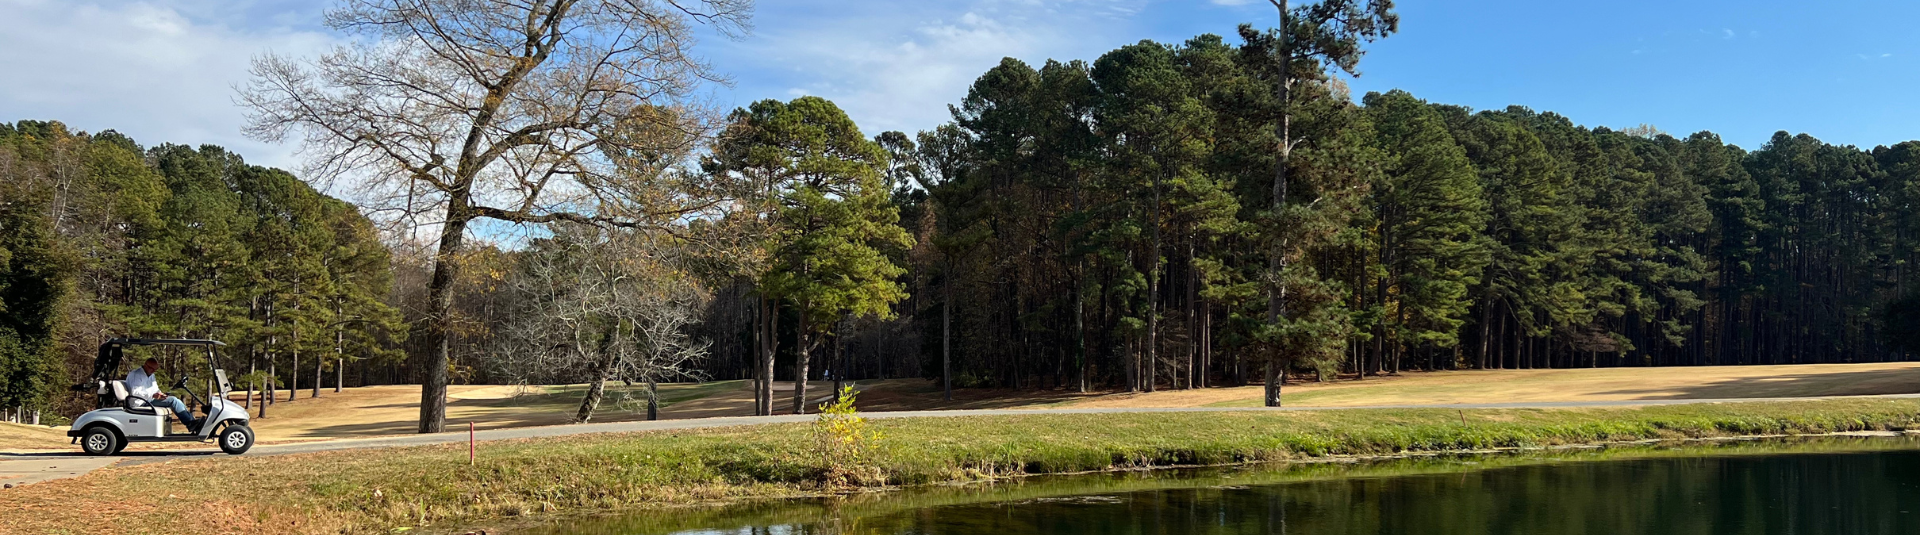 panoramic view of golf course